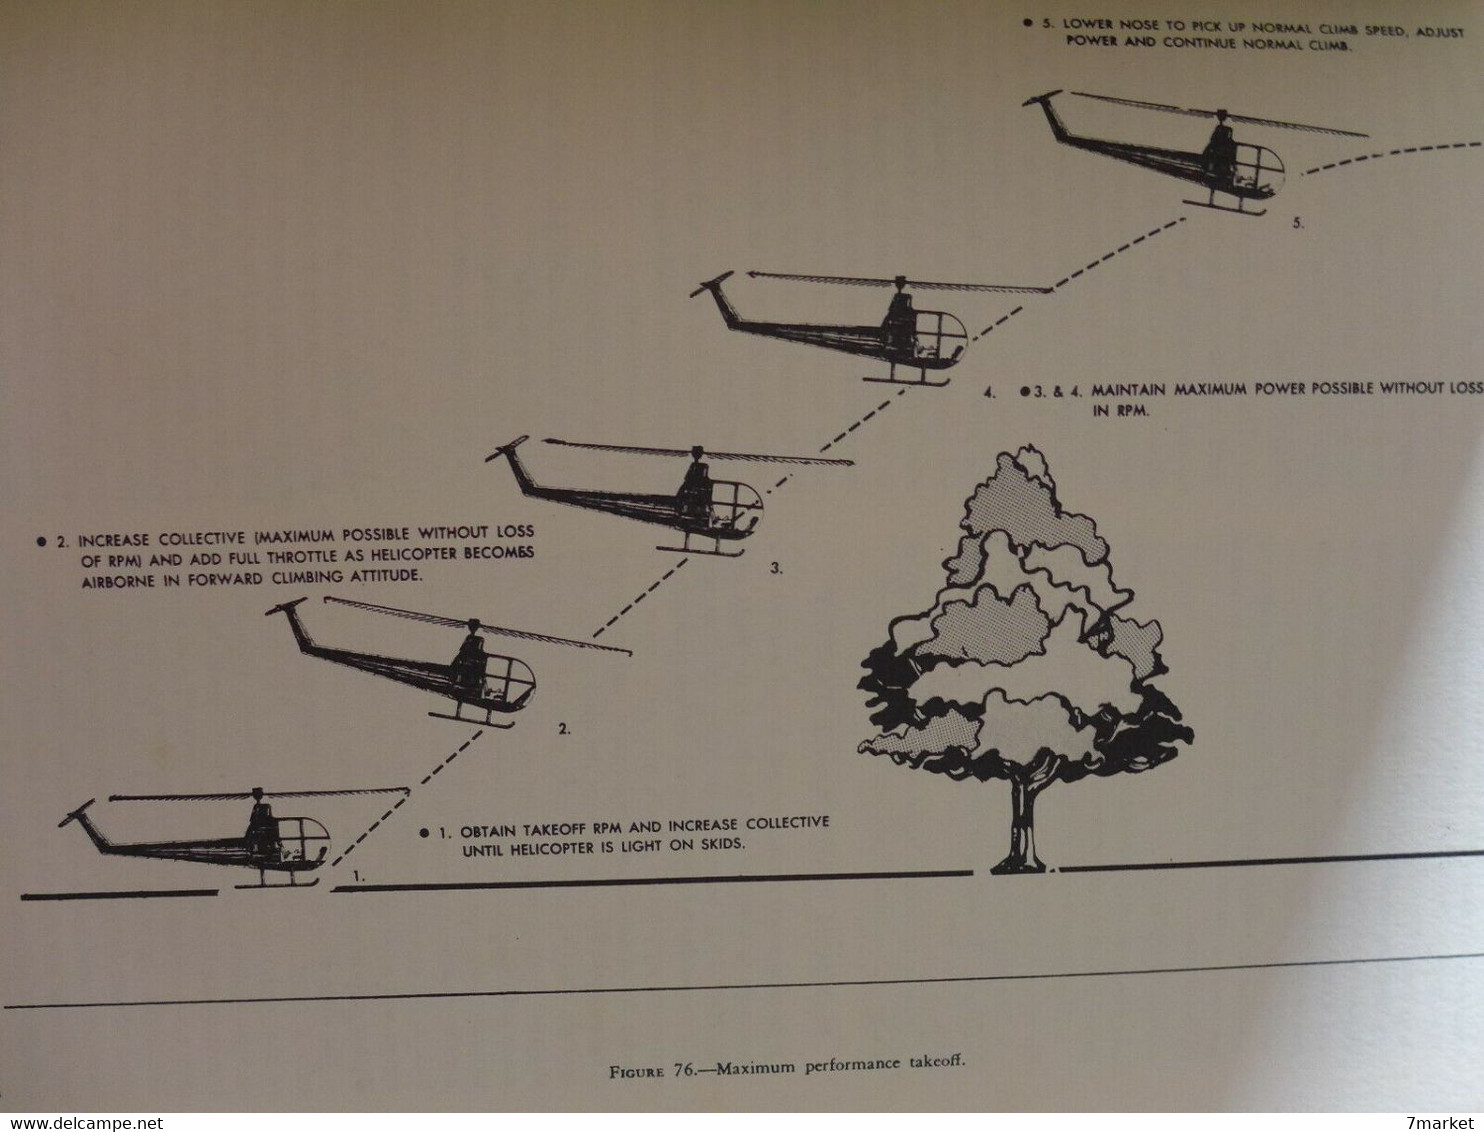 Basic Guide To Helicopters. Helicopters Aerodynamics, Performance & Flight Maneuvers / éd. Drake - 1978; En Anglais - Helikopters